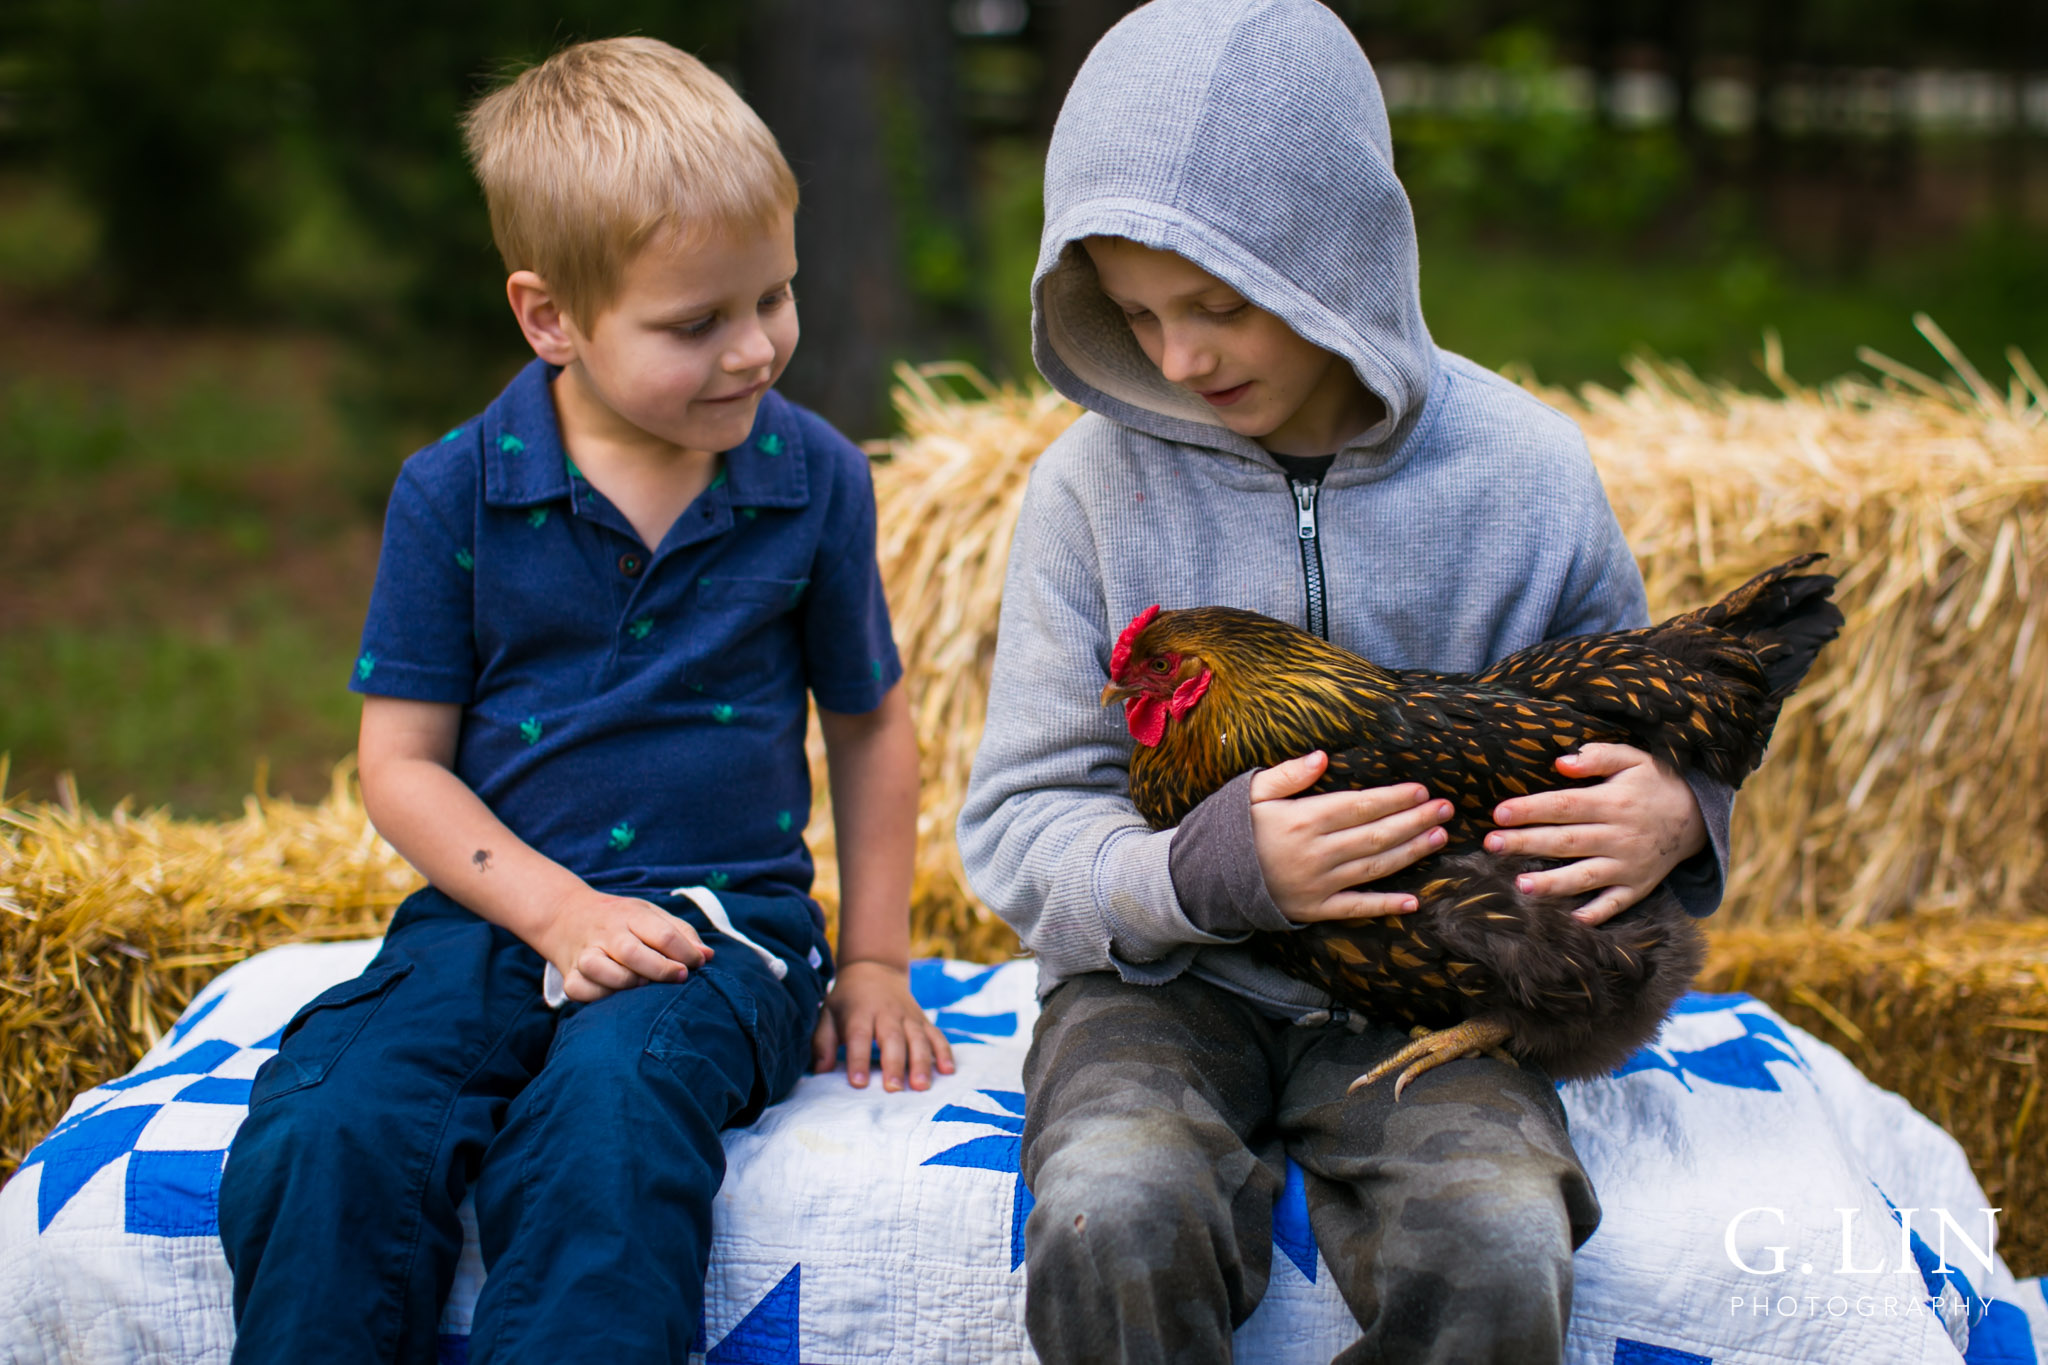 G. Lin Photography | Raleigh Event Photographer | Two boys on hay stack holding chicken